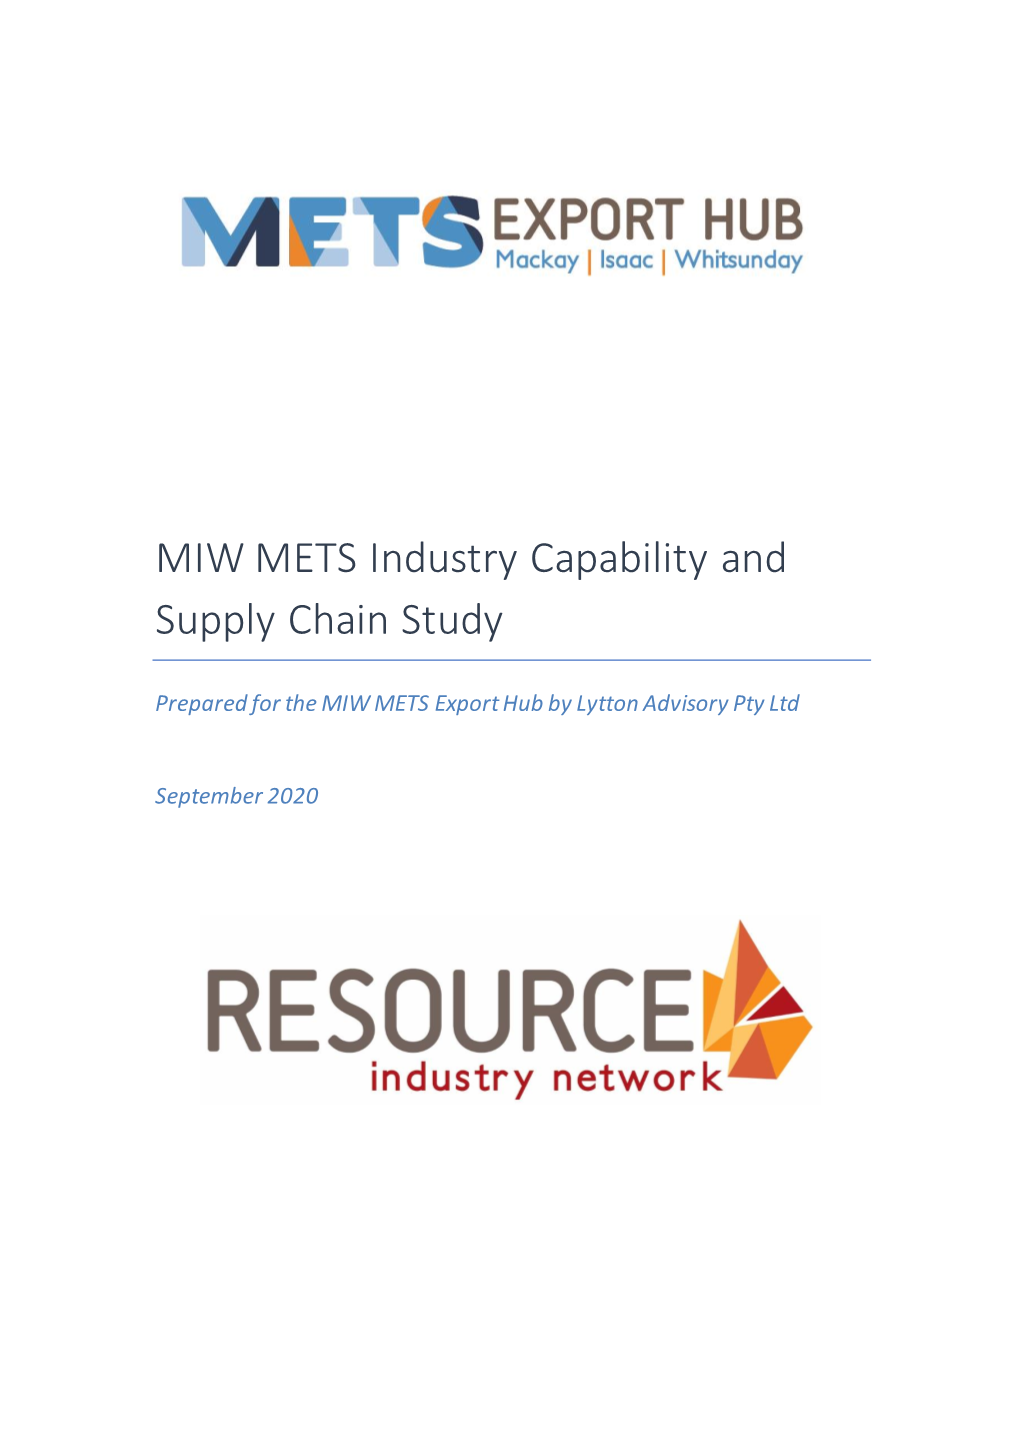 MIW METS Industry Capability and Supply Chain Study